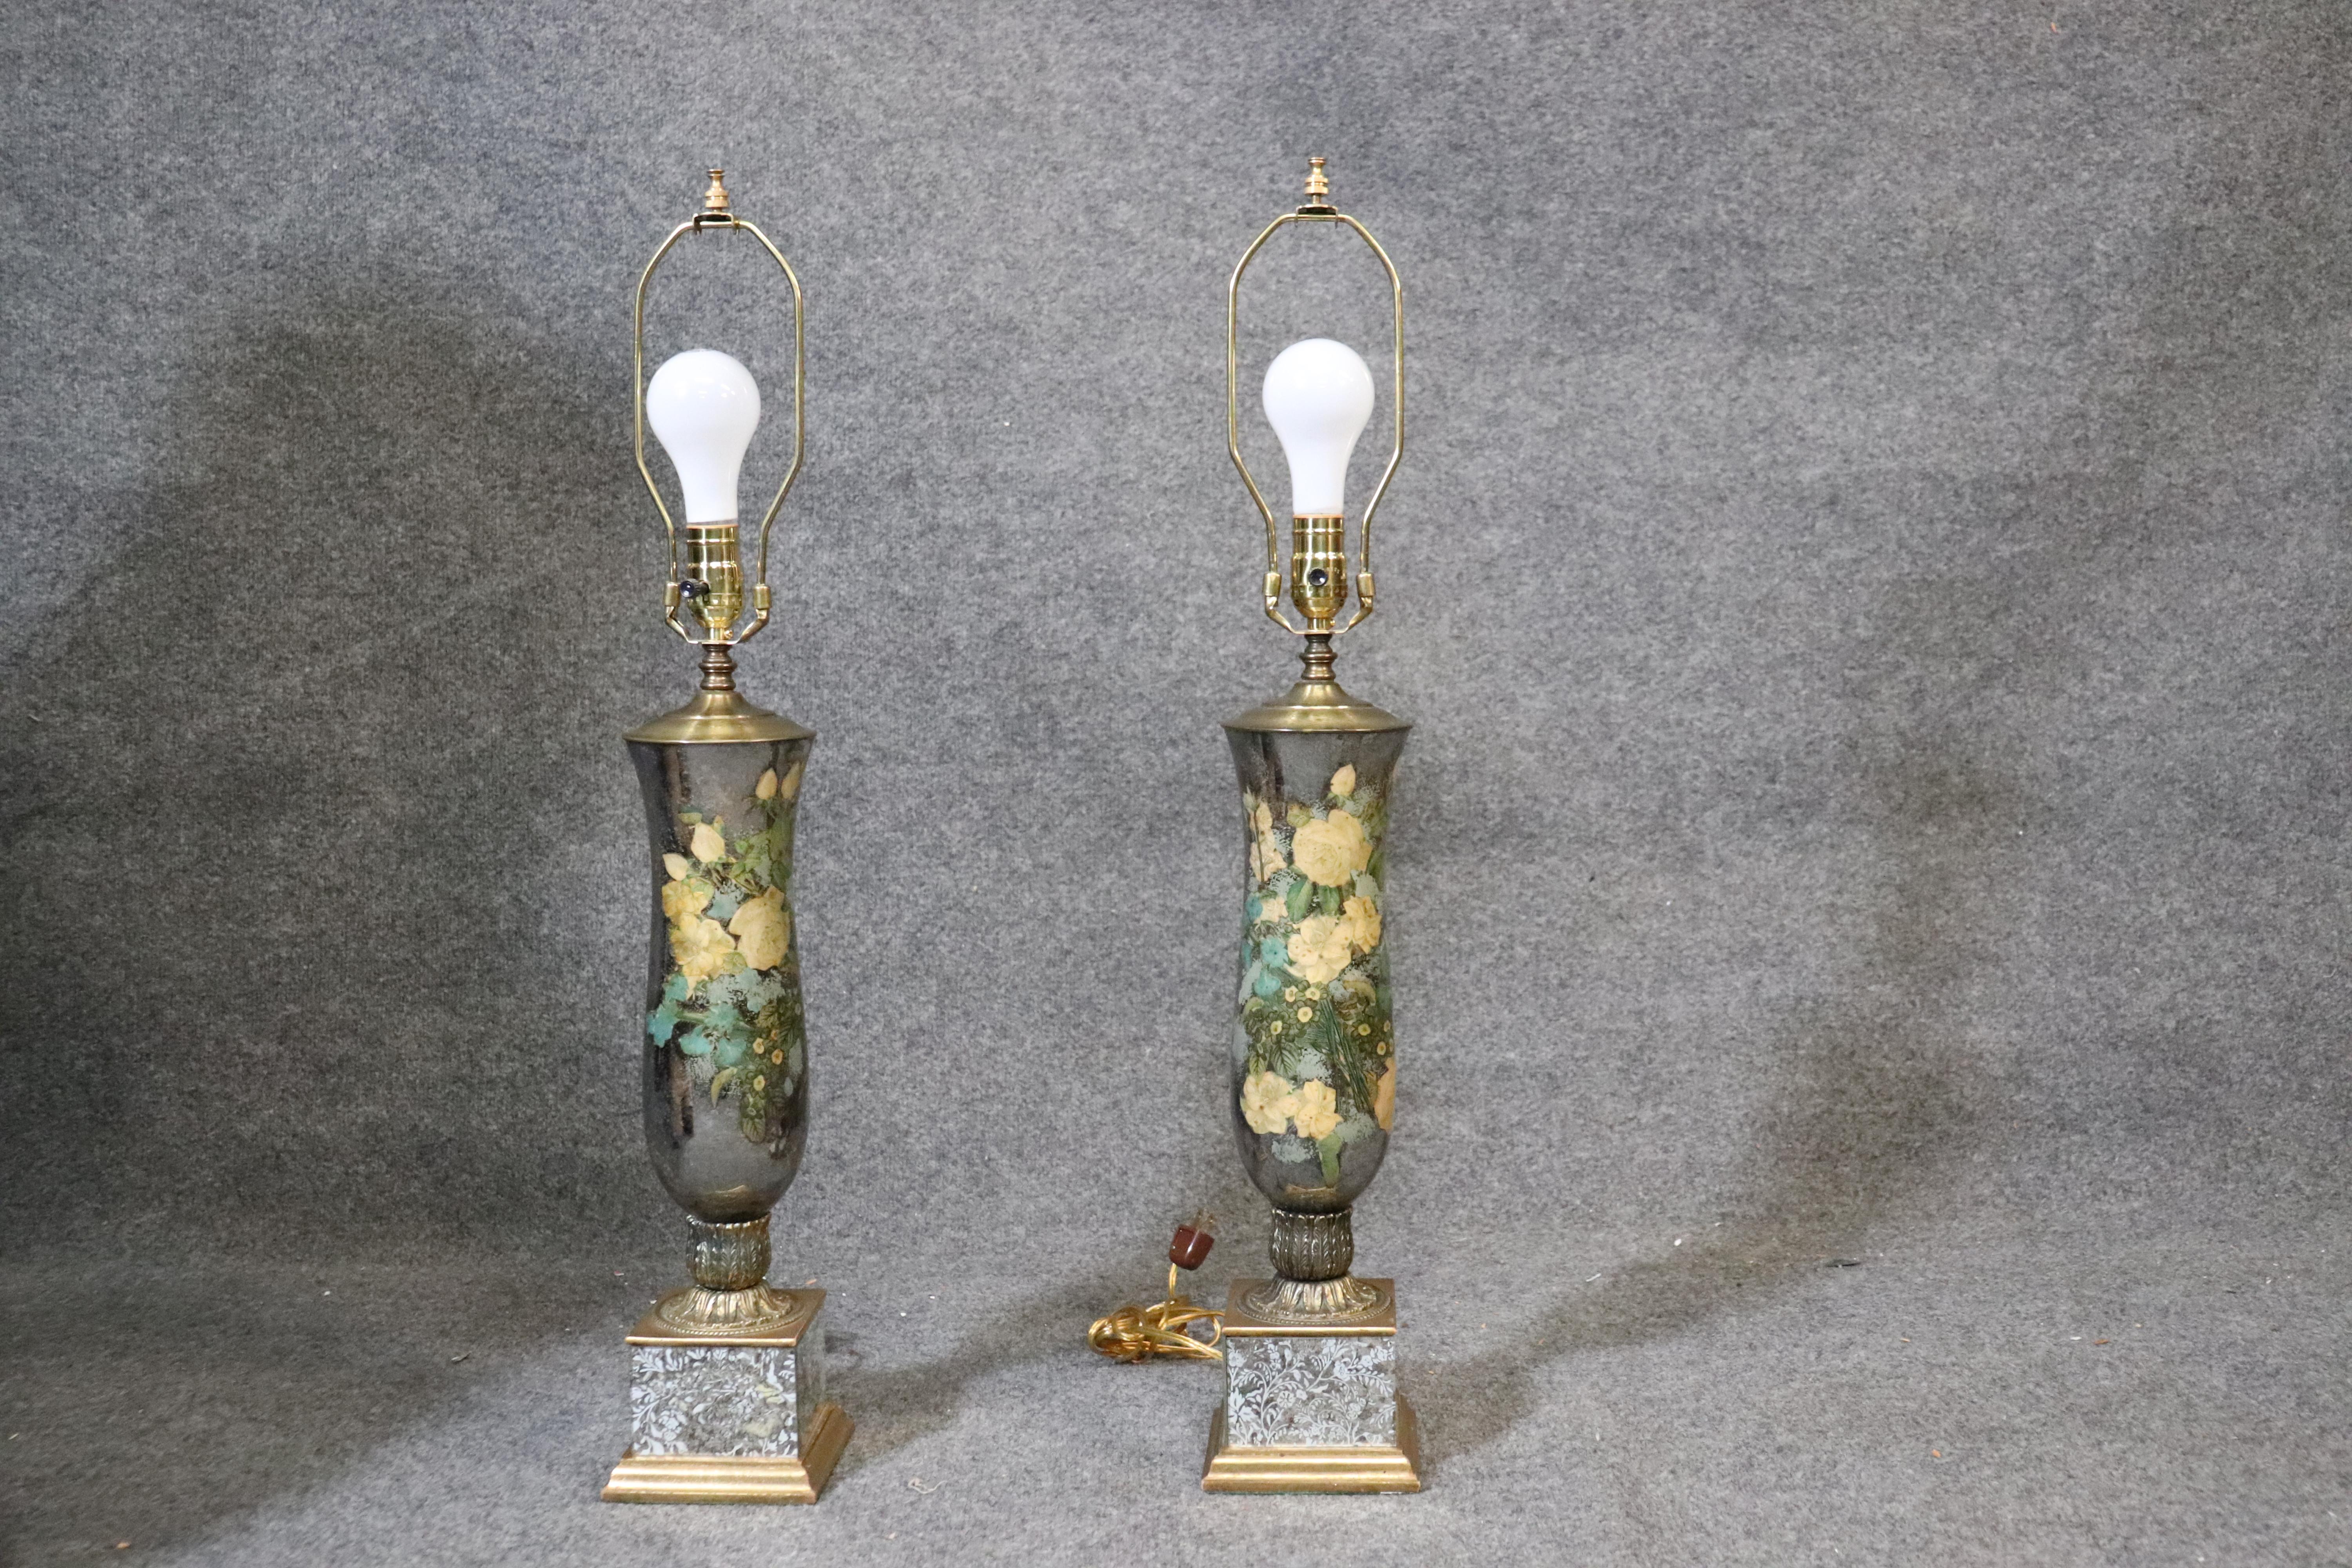 This is a rare pair of beautiful Fornasetti style silver leaf gilded paint decorated lamps. The detail of the bases in the bronze casting is extraordinary. The condition of the églomisé is very, very good with no apparent losses. The lamps date to